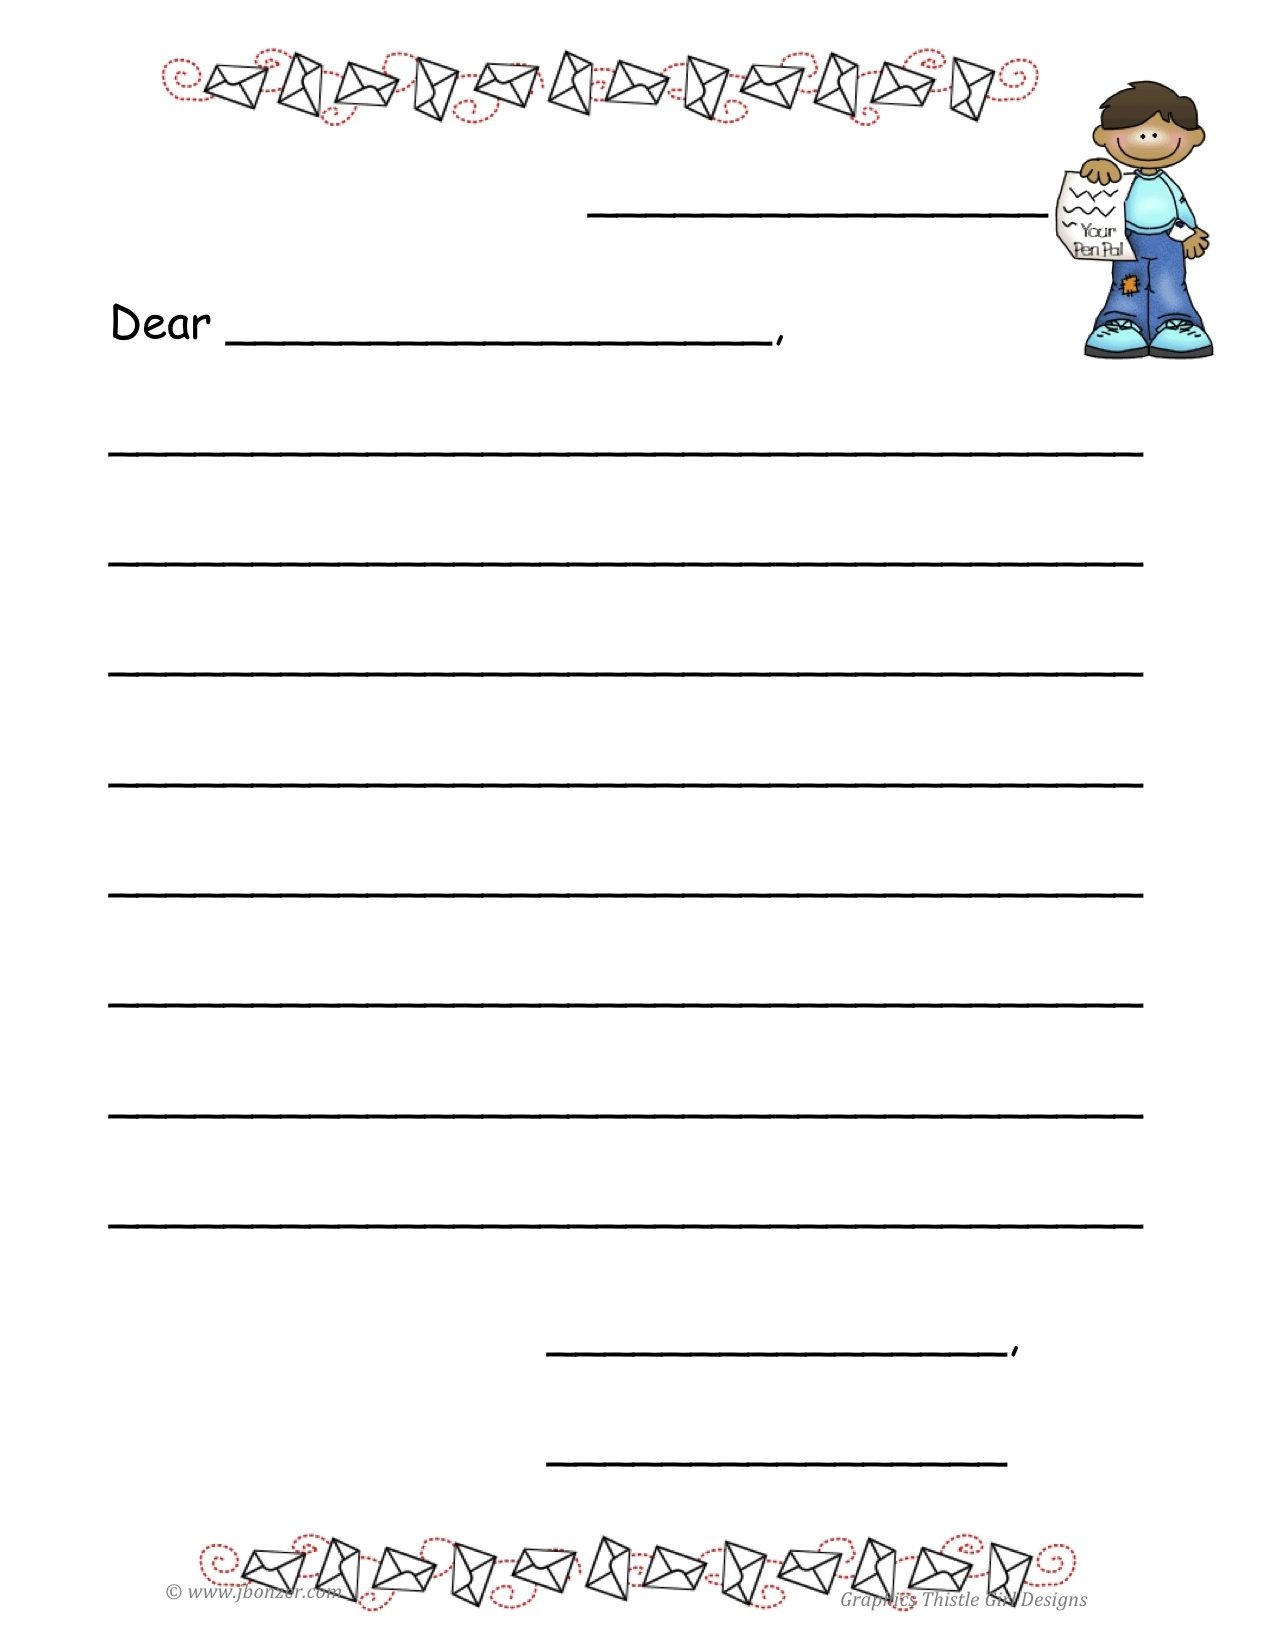 Blank+Friendly+Letter+Template | Letter Writing | Friendly Letter - Free Printable Letter Writing Templates